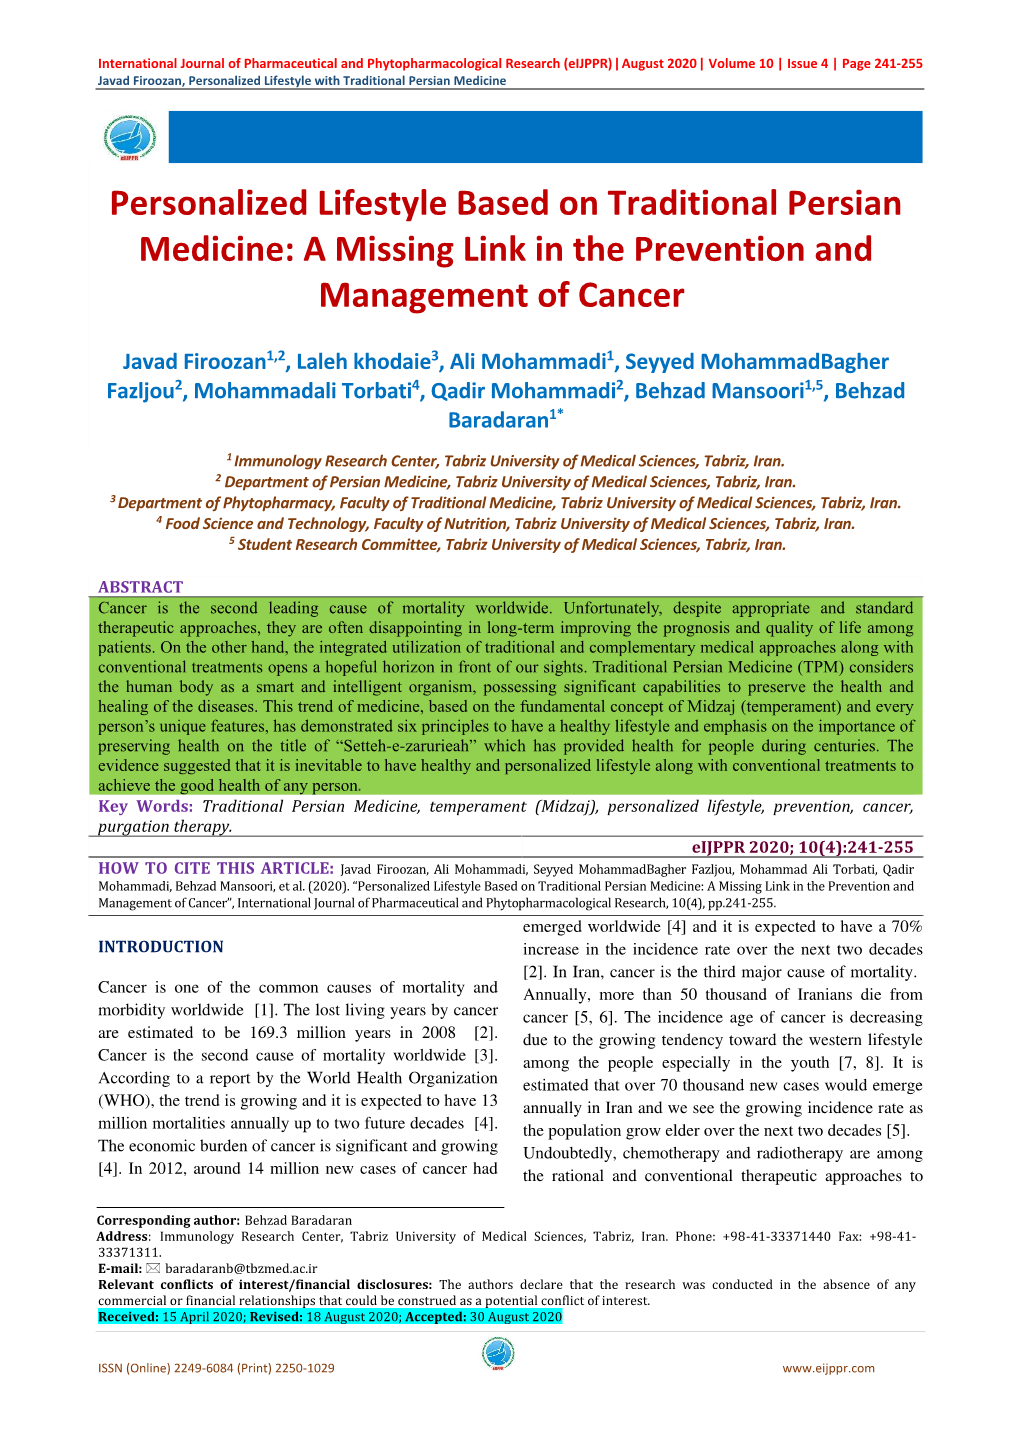 Personalized Lifestyle Based on Traditional Persian Medicine: a Missing Link in the Prevention and Management of Cancer